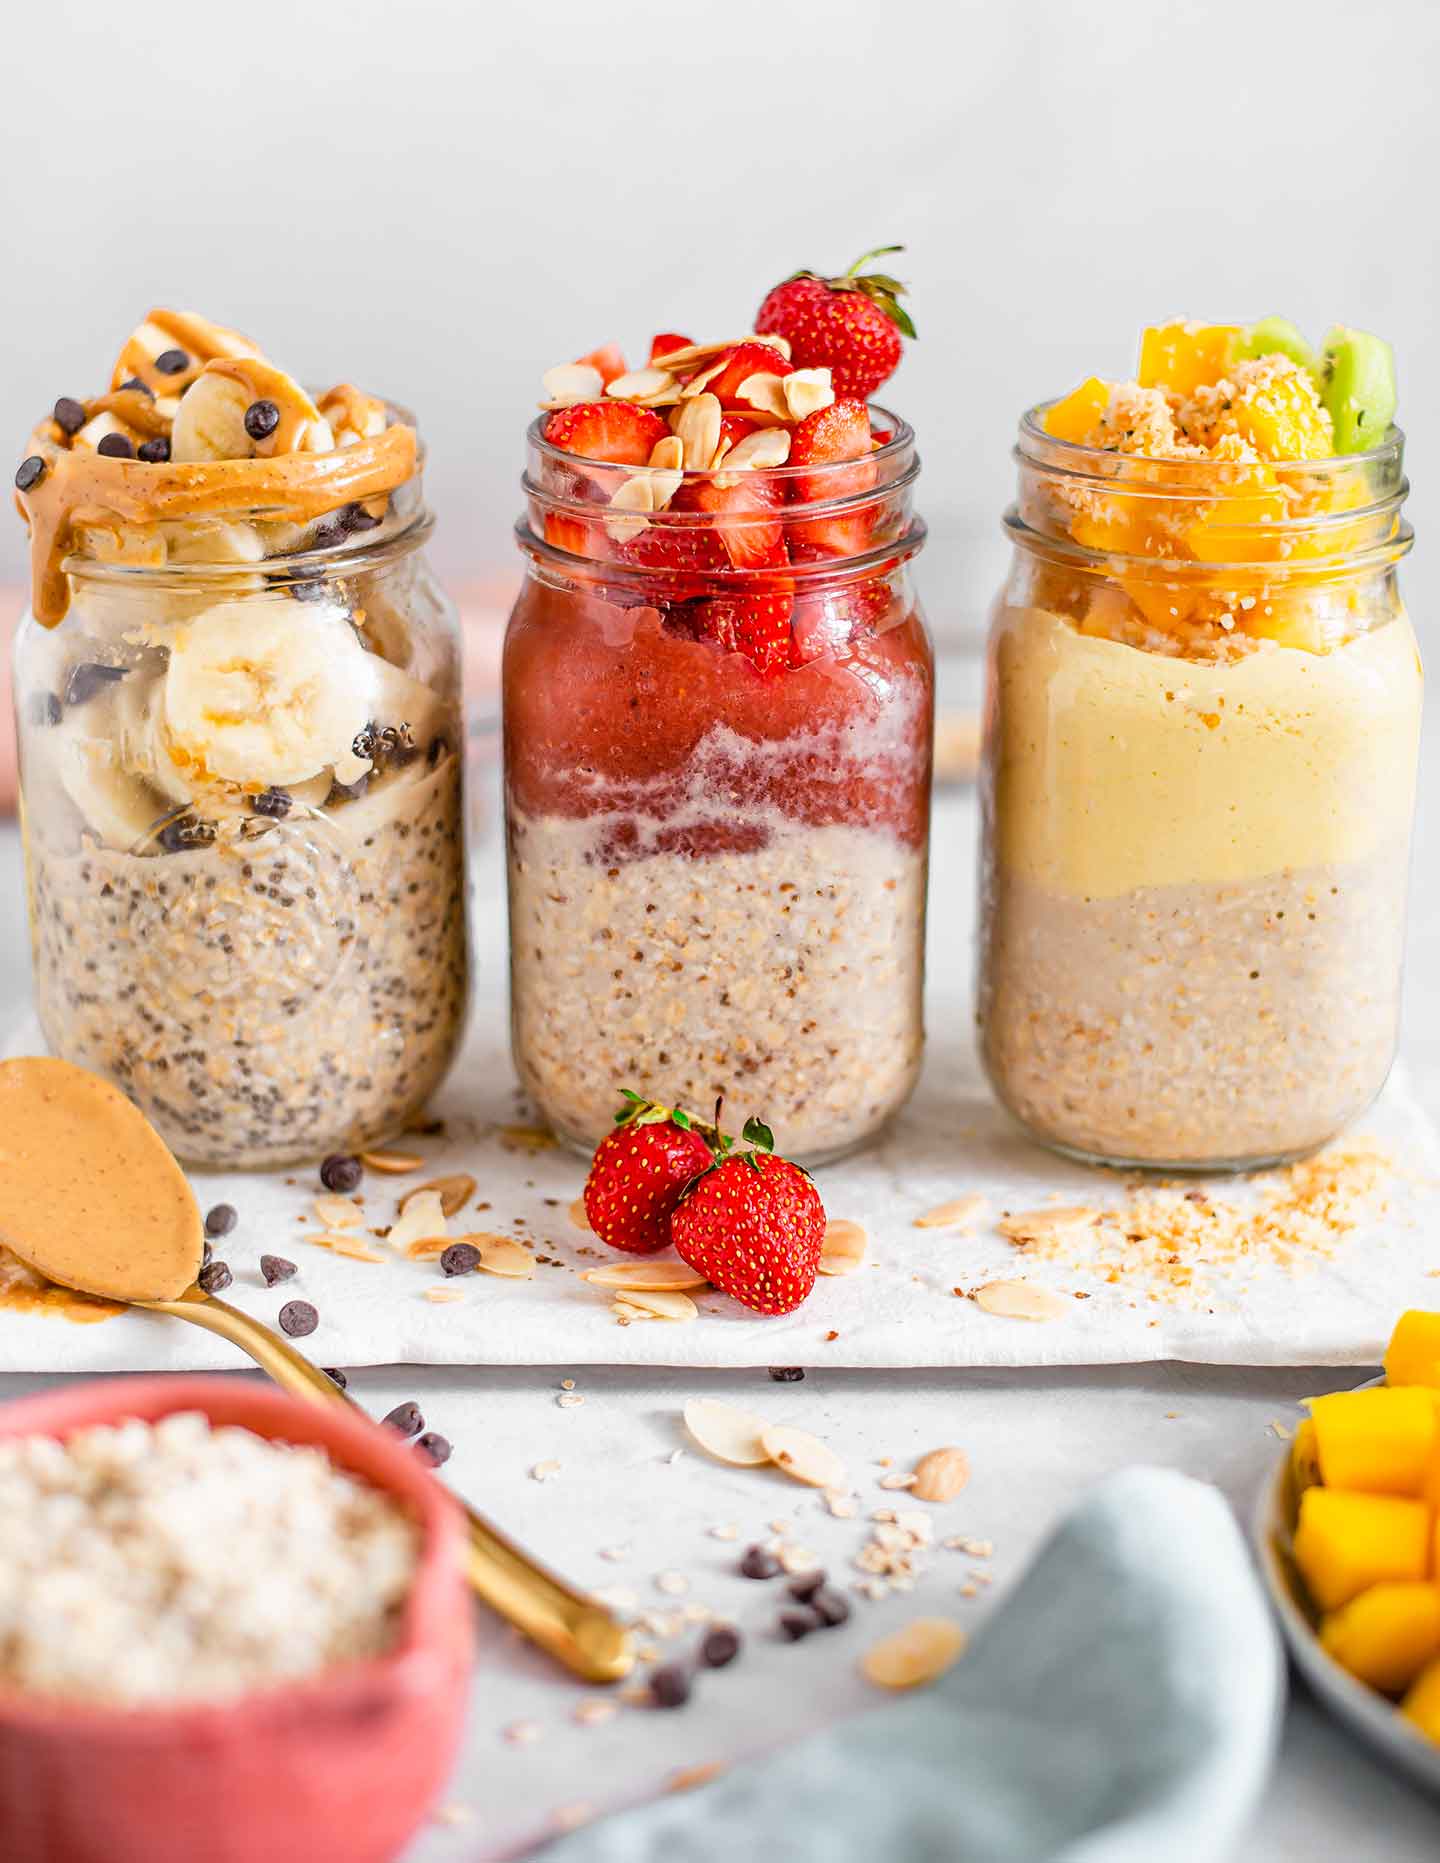 Side view of three jars of overnight oats. One is peanut butter banana chip, one is strawberries and jam, and the last is mango and yogurt. Ingredients are scattered around the base of the jars.